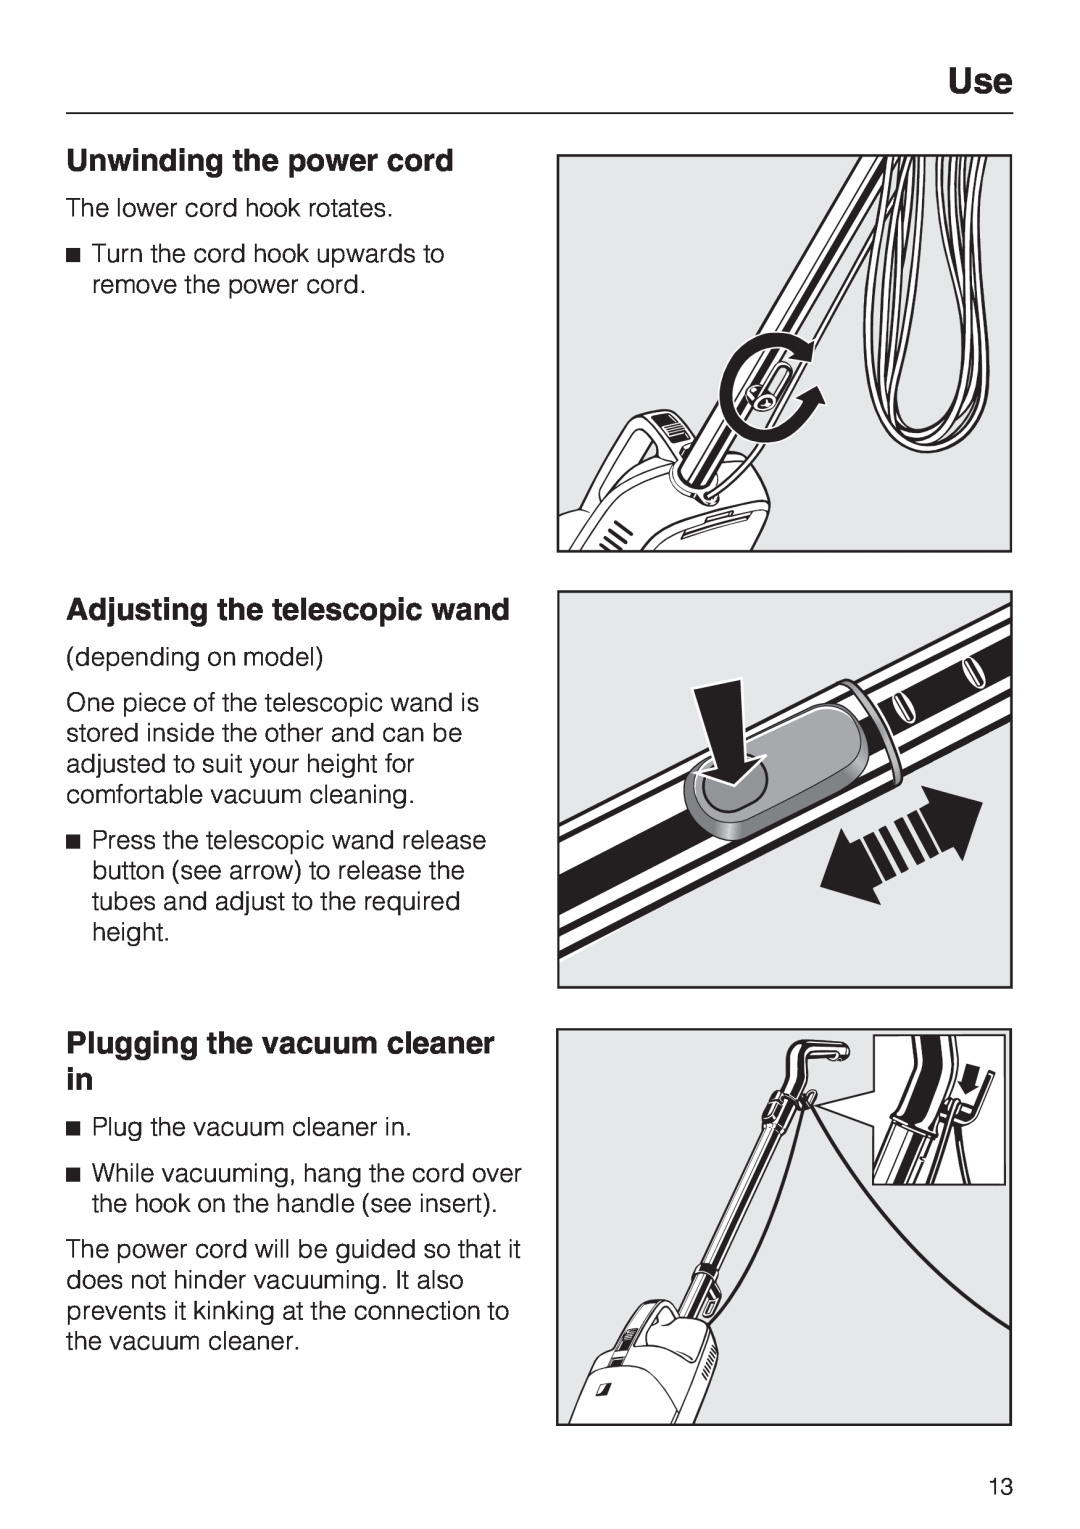 Miele S 190 operating instructions Unwinding the power cord, Adjusting the telescopic wand, Plugging the vacuum cleaner in 